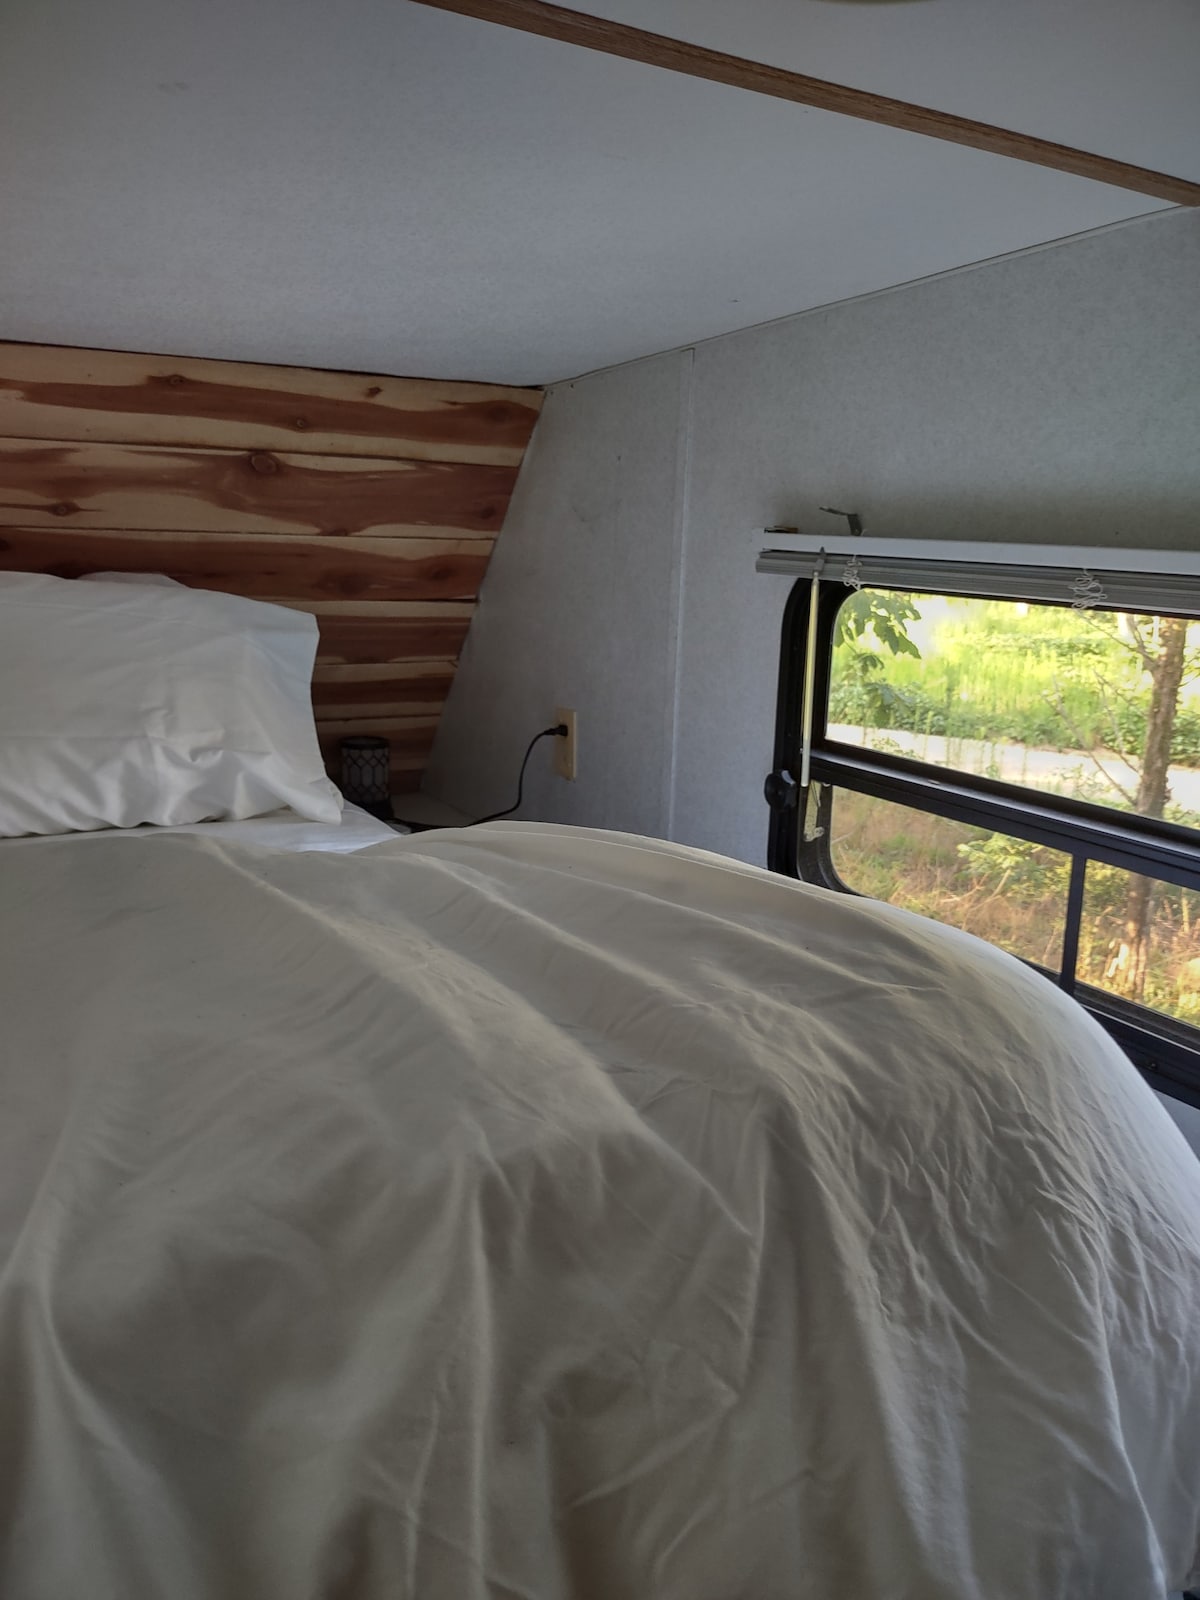 New QUEEN Sealy Pillowtop RV In Woods